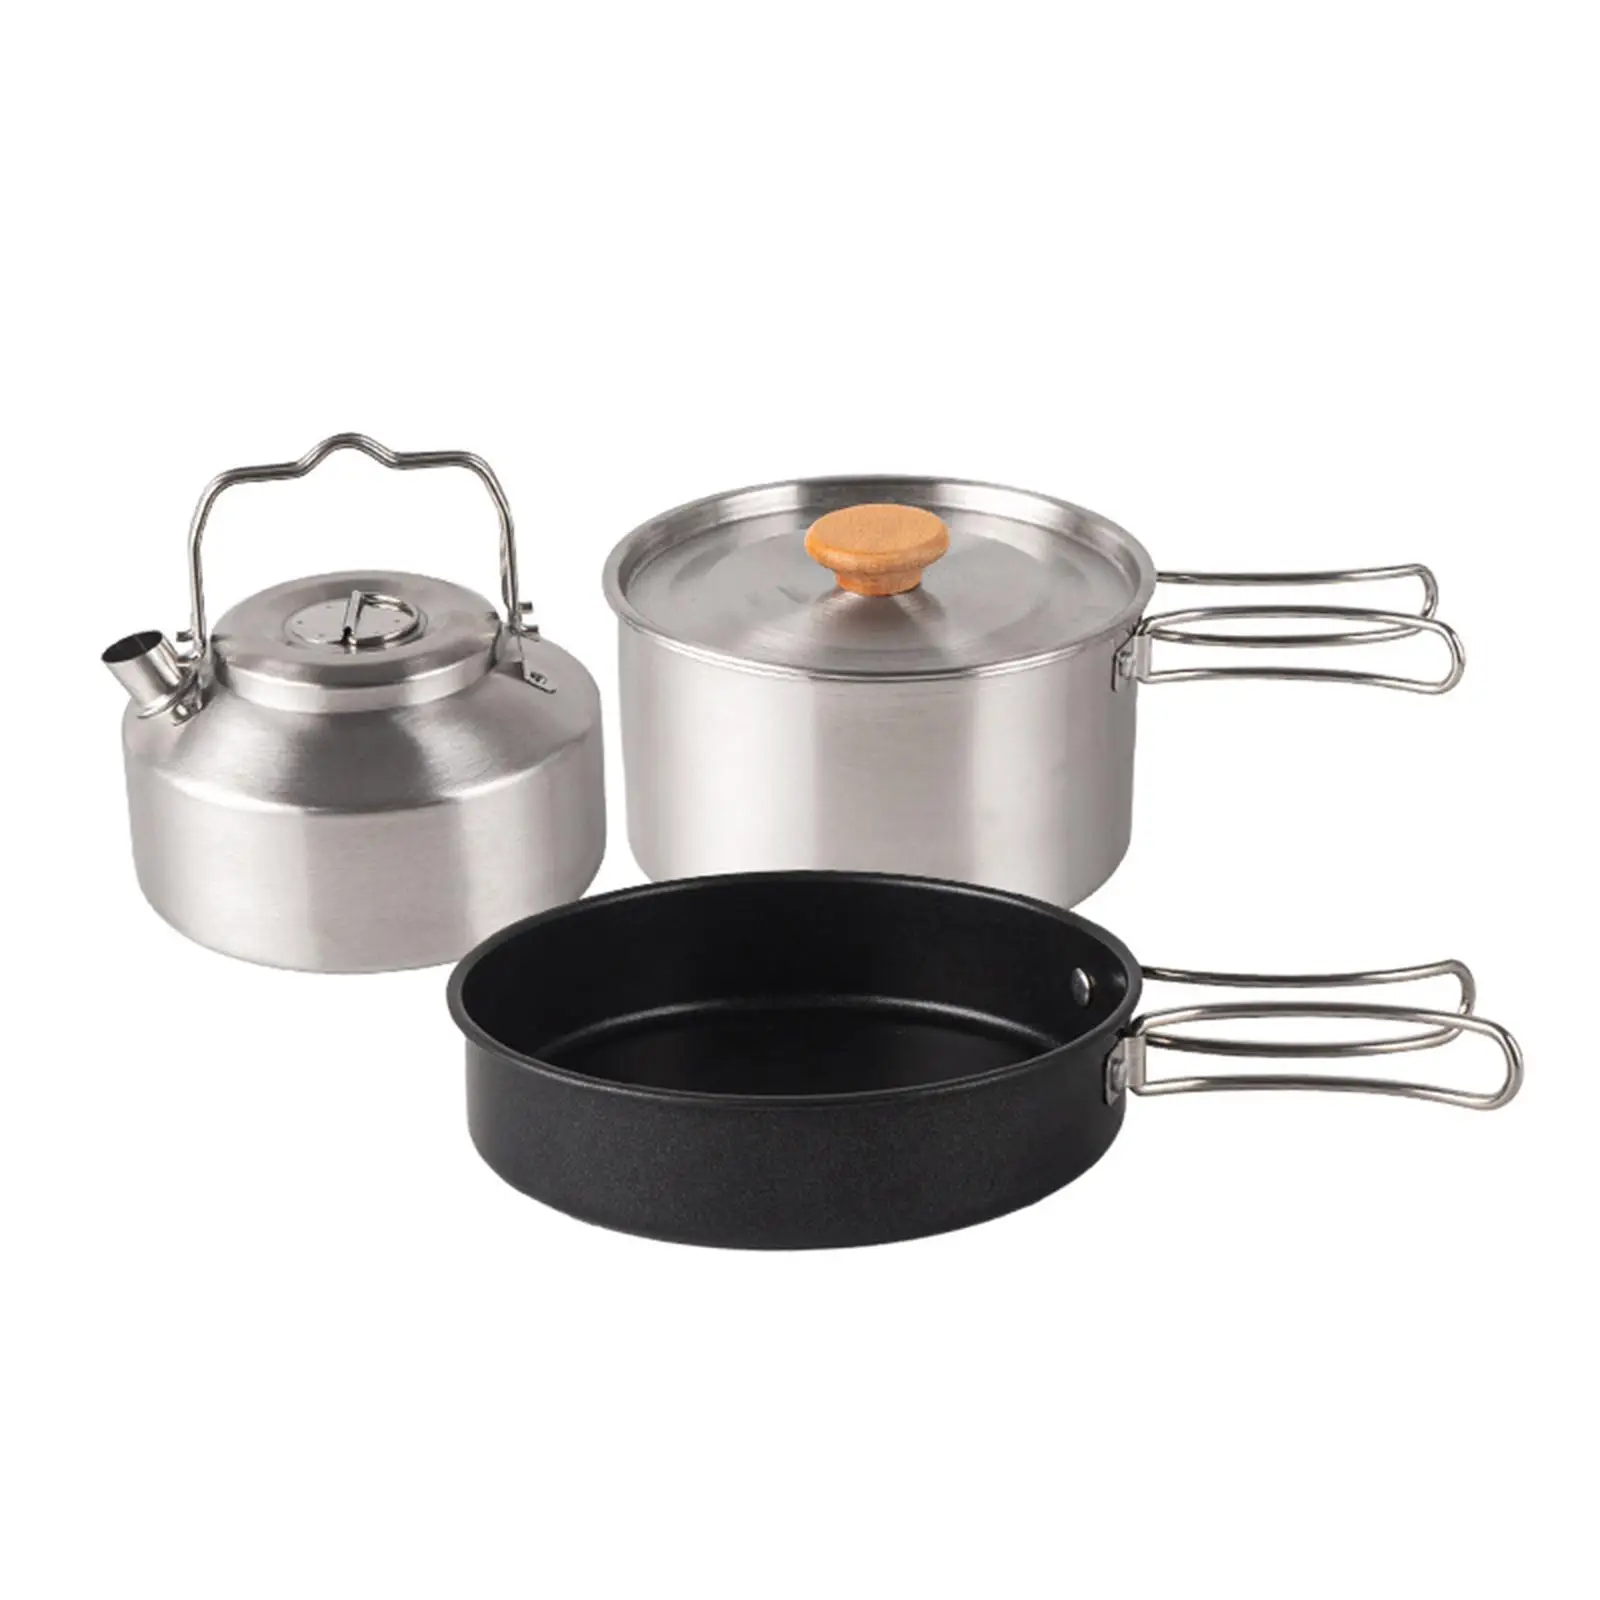 Camping Cookware Set Kitchen Utensils Camping Cooking Set Camping Pot and Pan Kettle for Picnic Cooking Fishing Camping Home